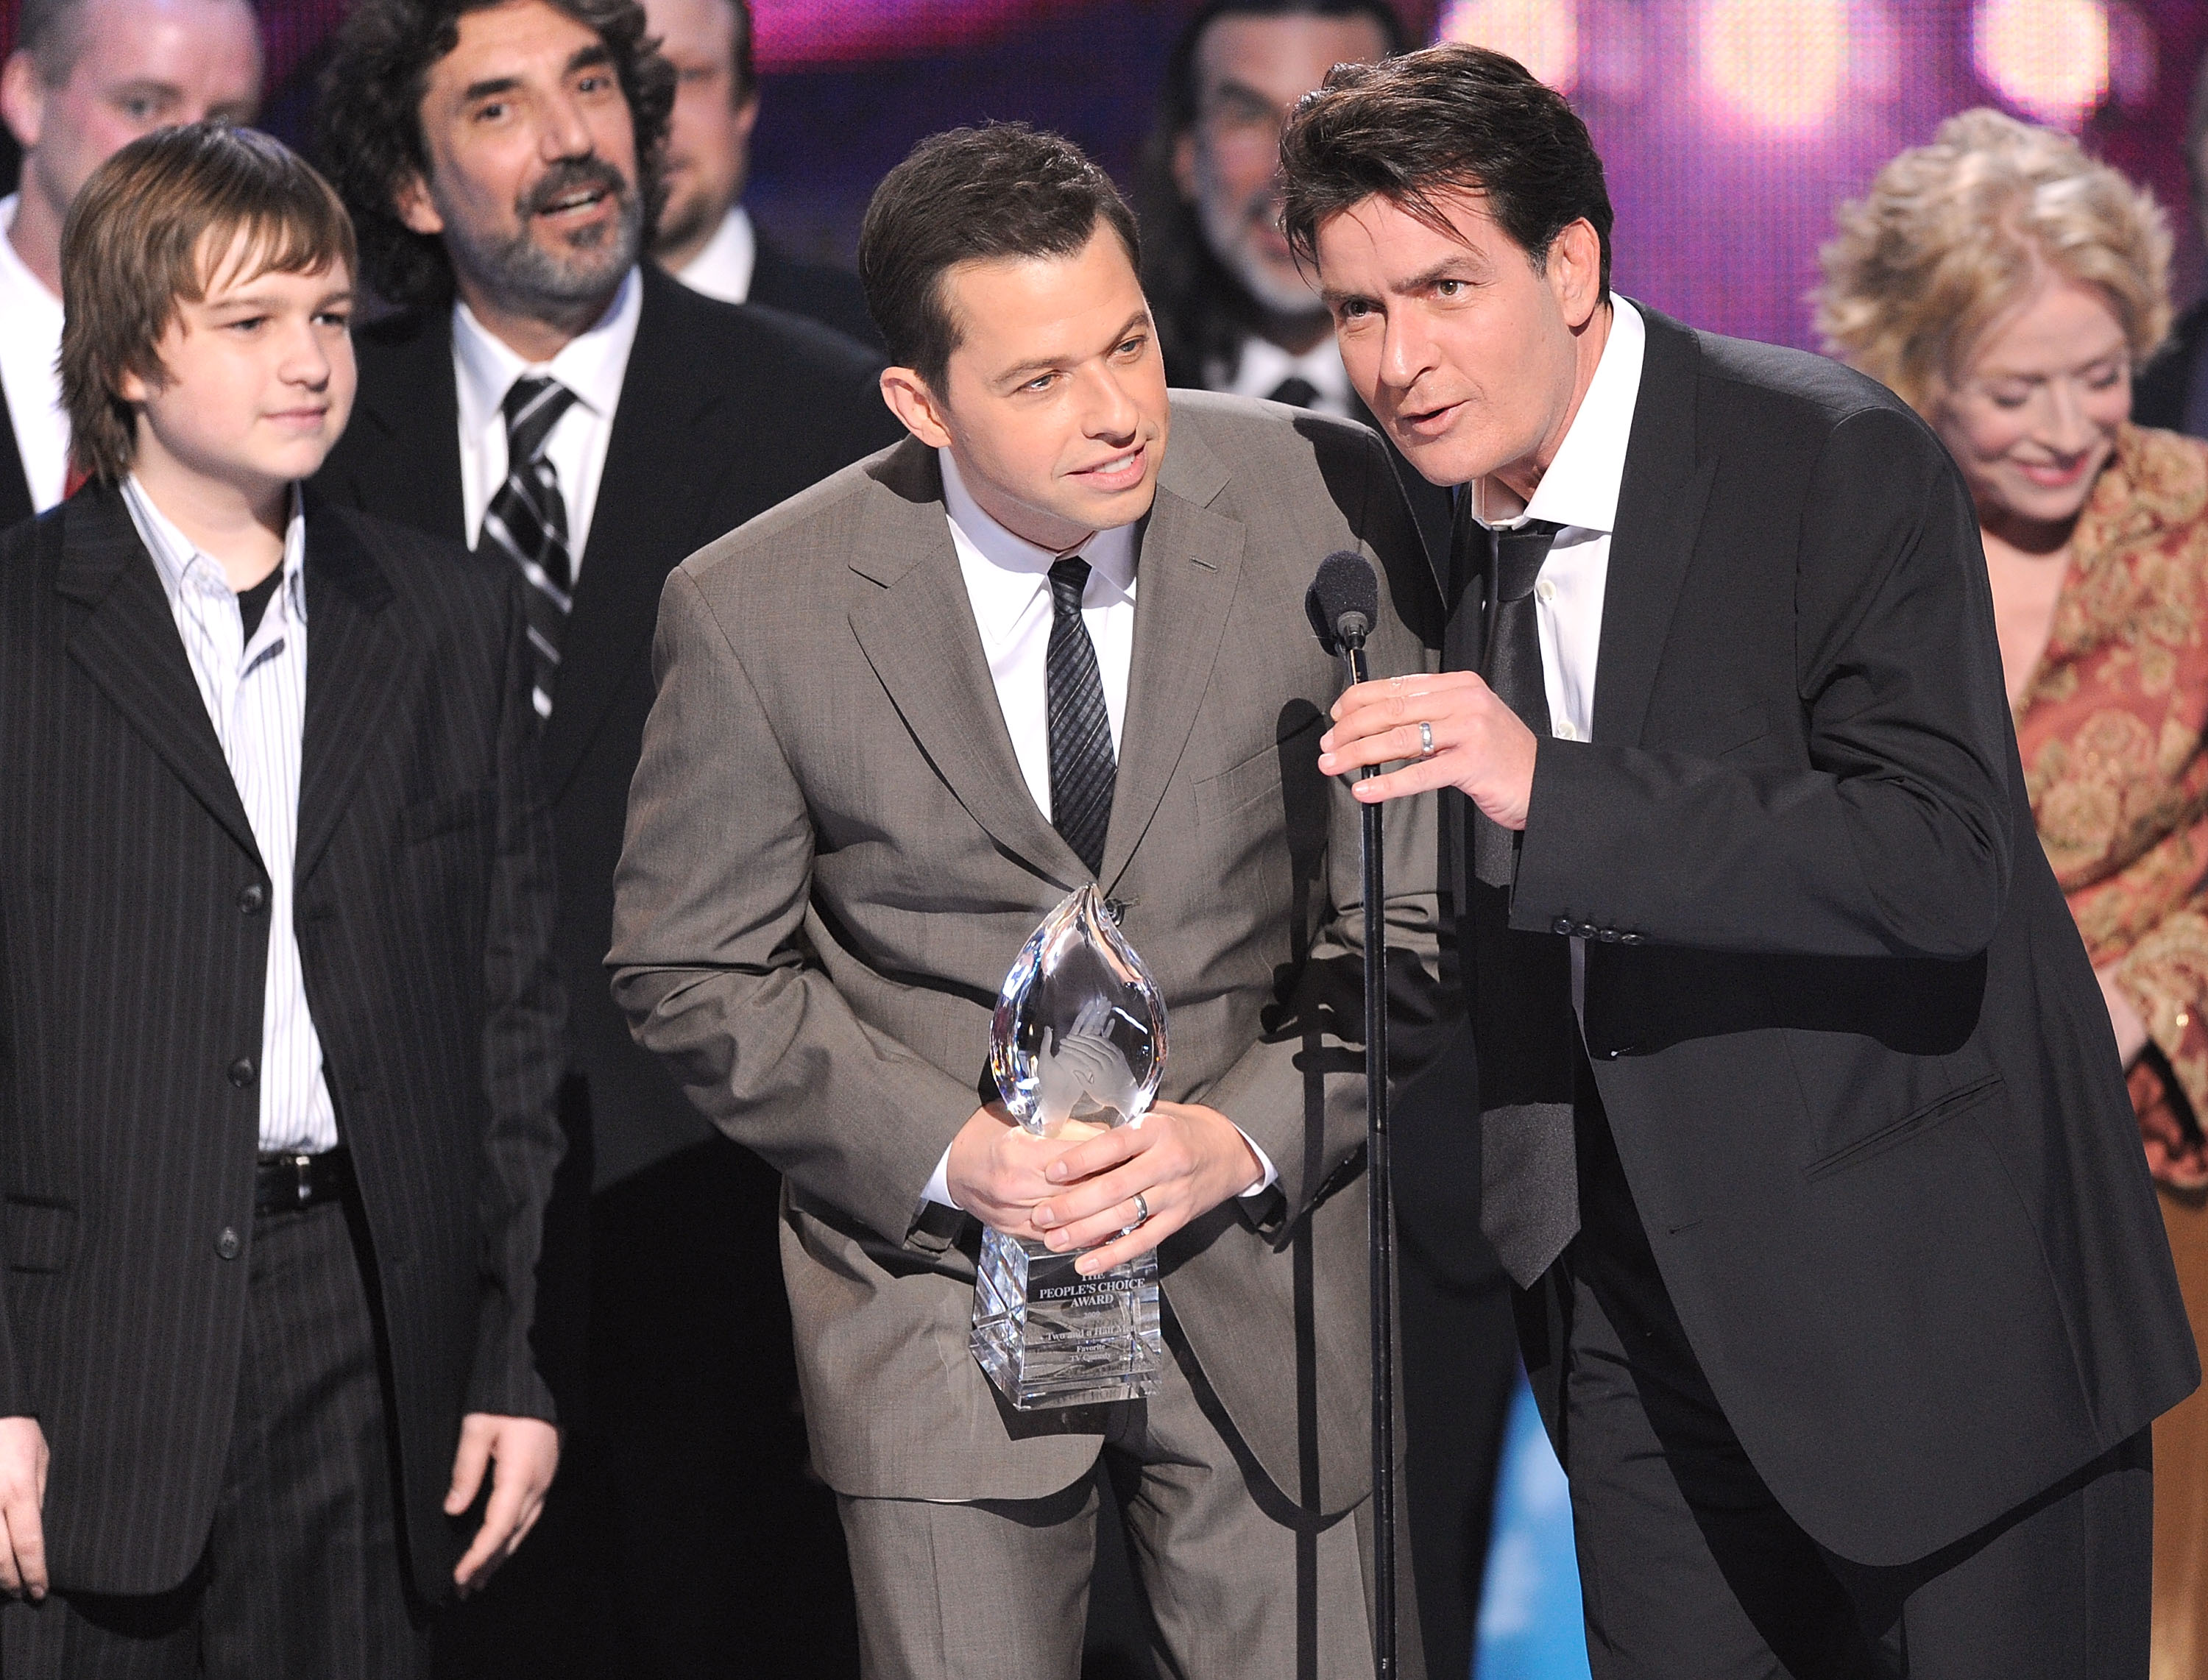 ngus T. Jones, Jon Cryer and Charlie Sheen accepting their People Choice Award in Los Angeles in 2009 | Source: Getty Images